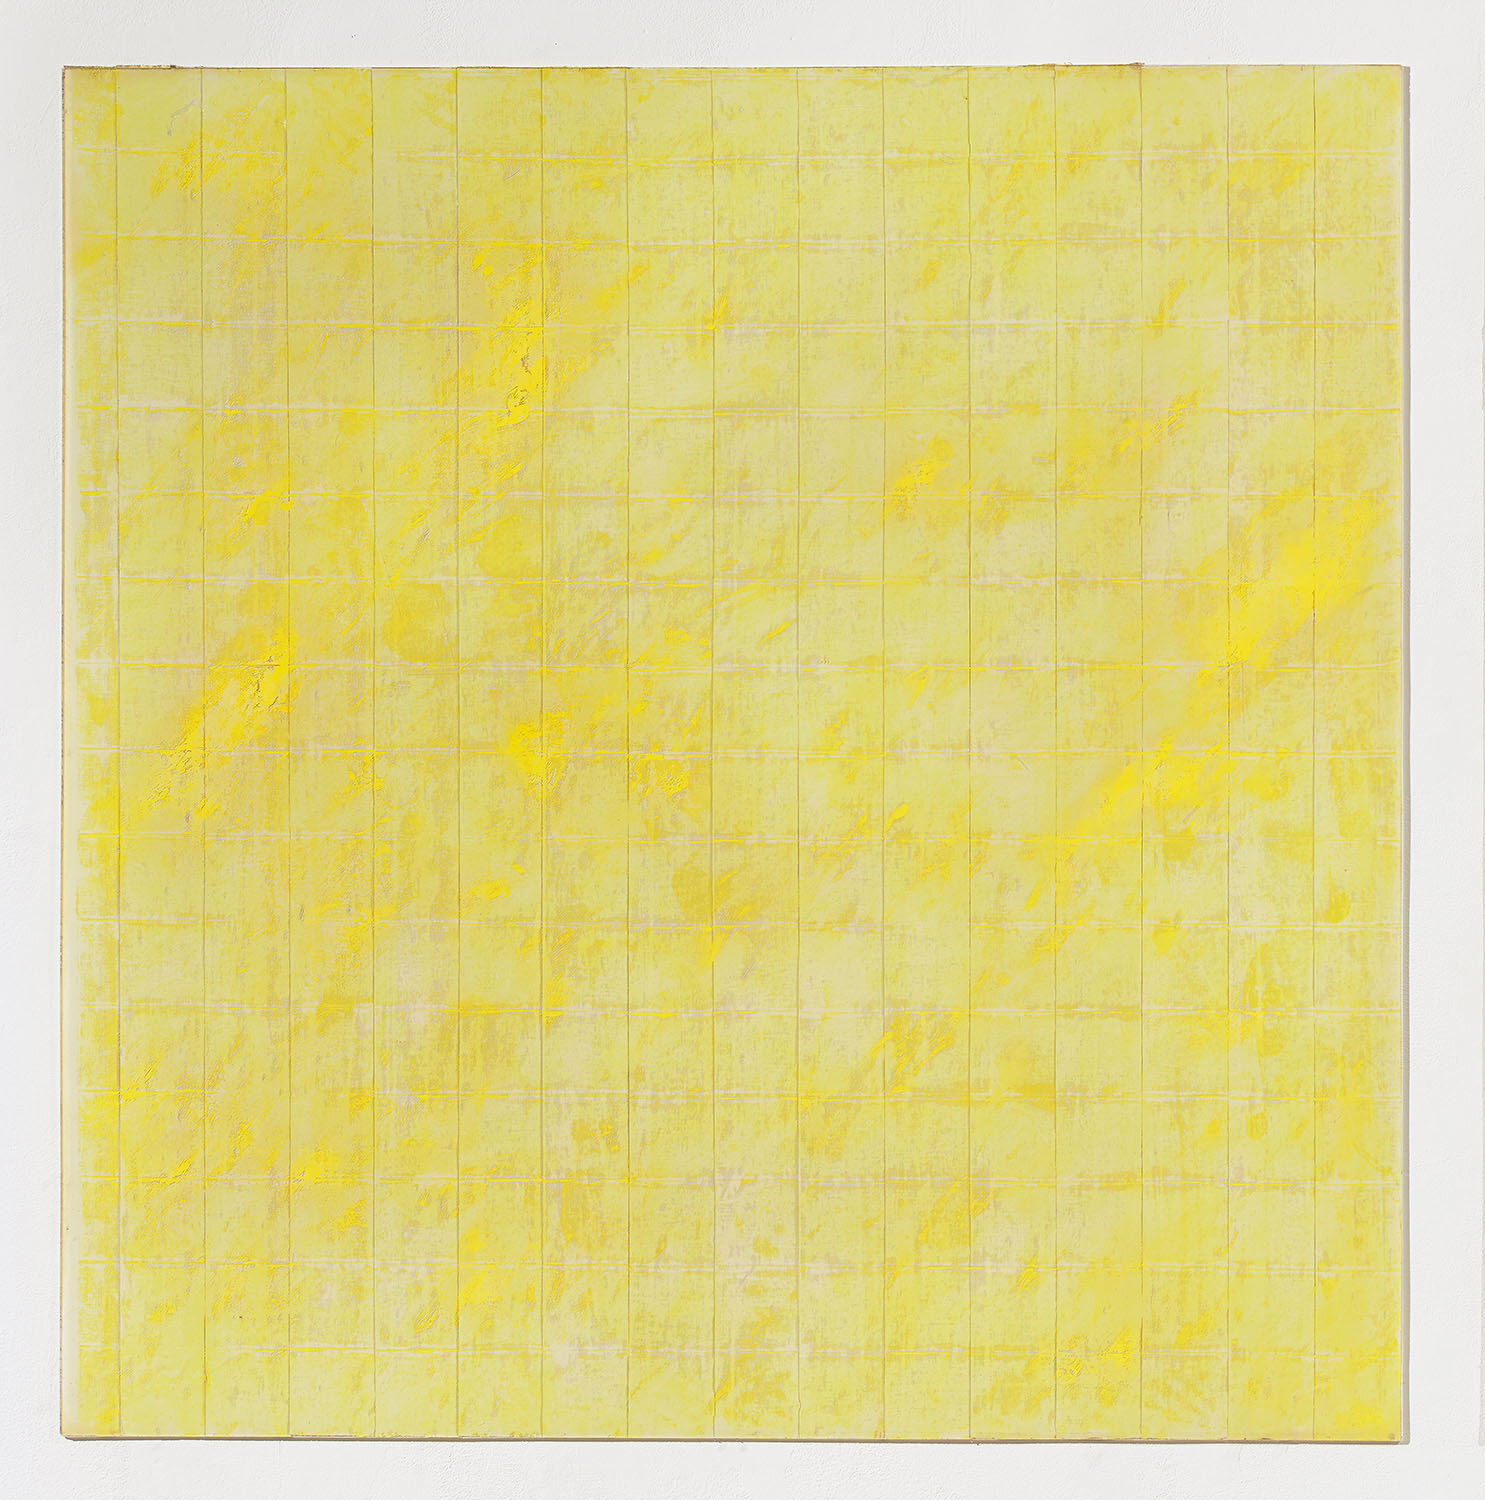  Untitled, 1979, oil paint and tape on plexiglas, 48 x 49 in 